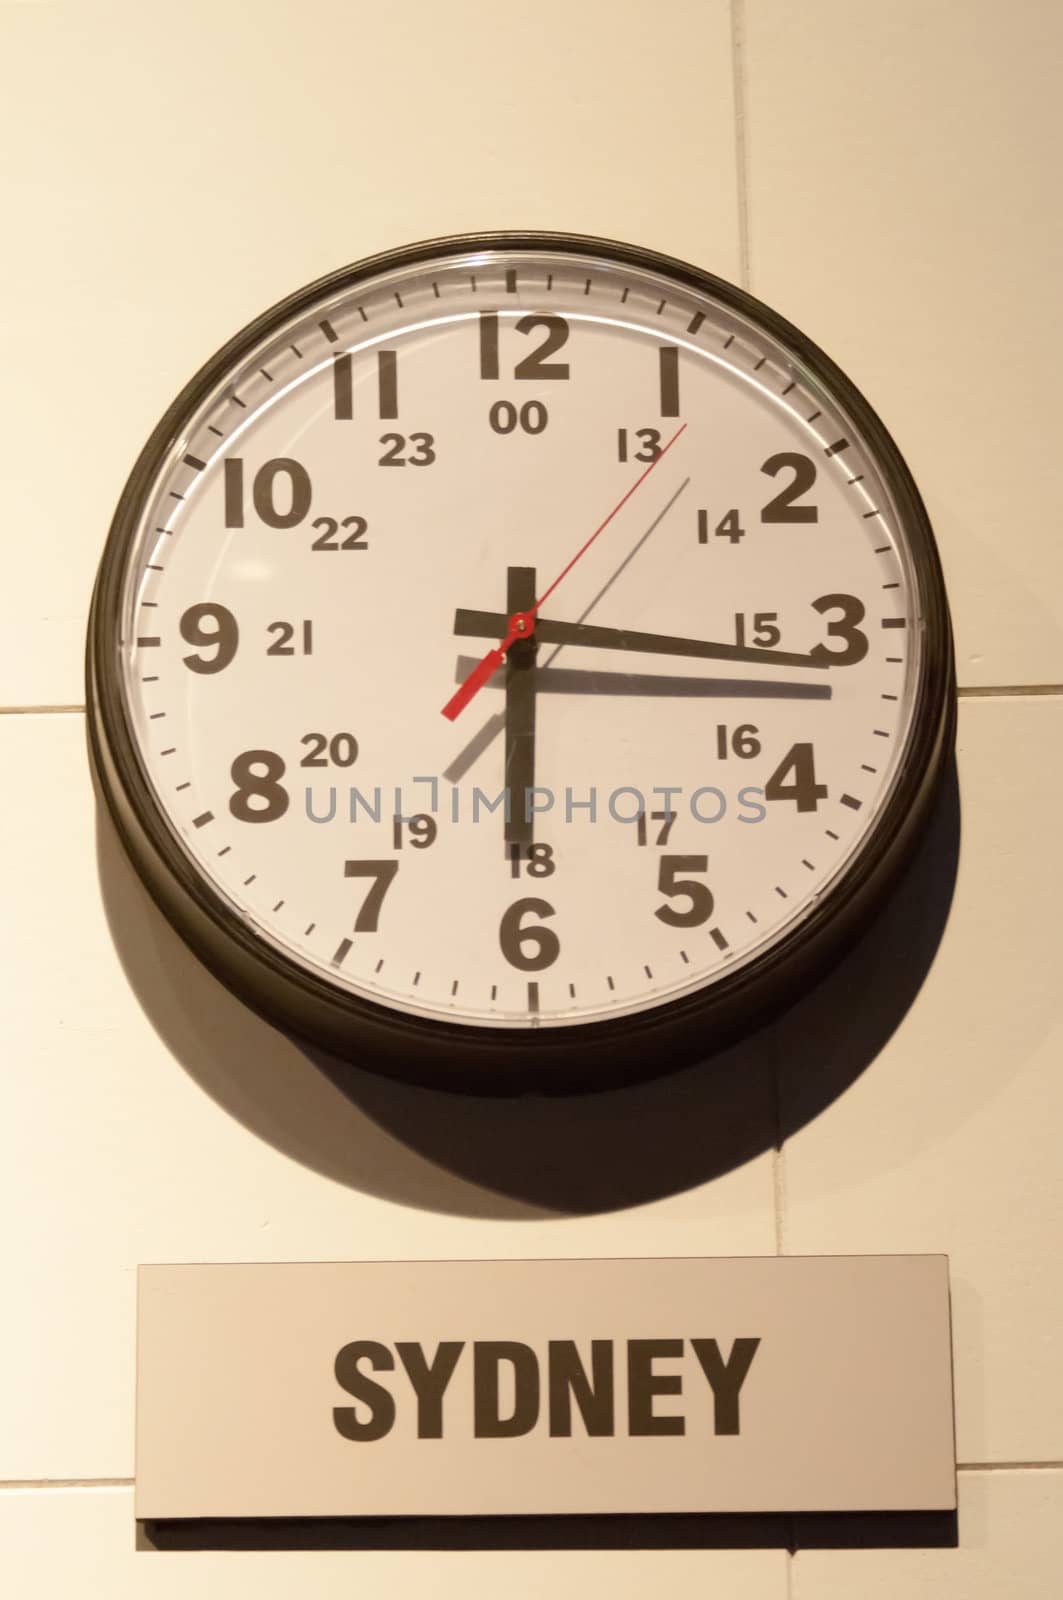 Timezone clocks showing different time